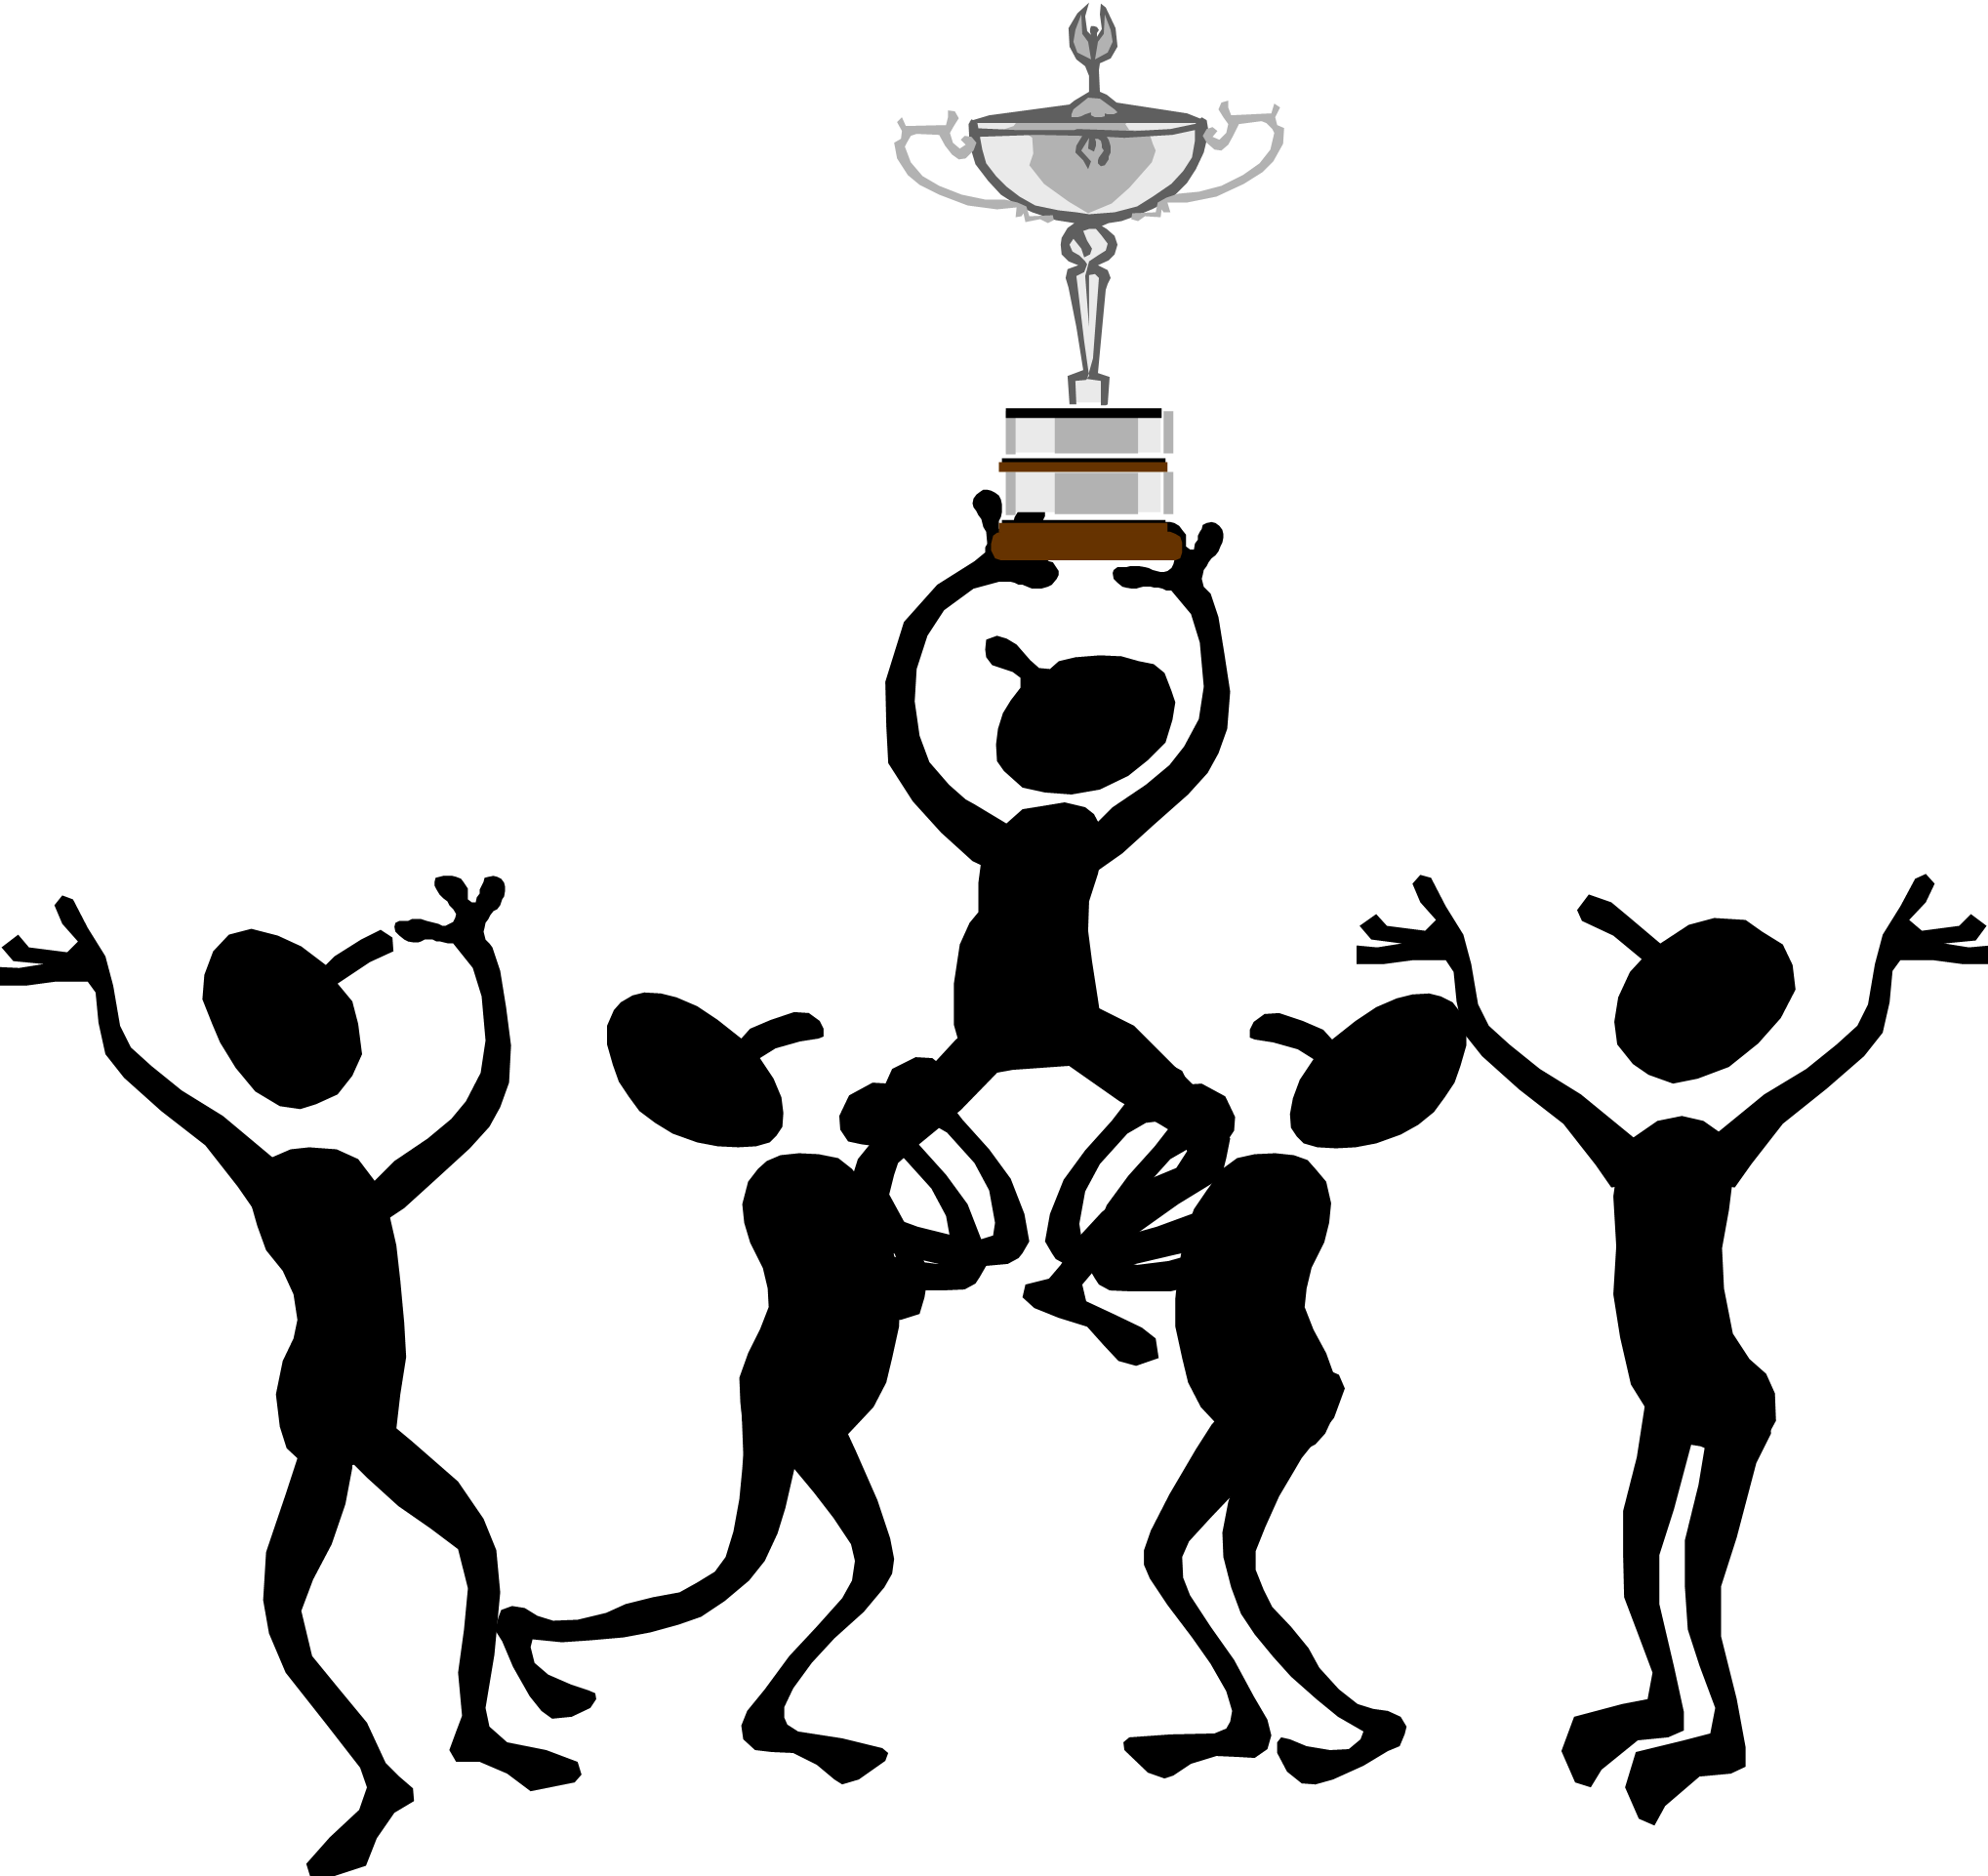 Winning Team Trophy Free Cliparts That You Can Download To You